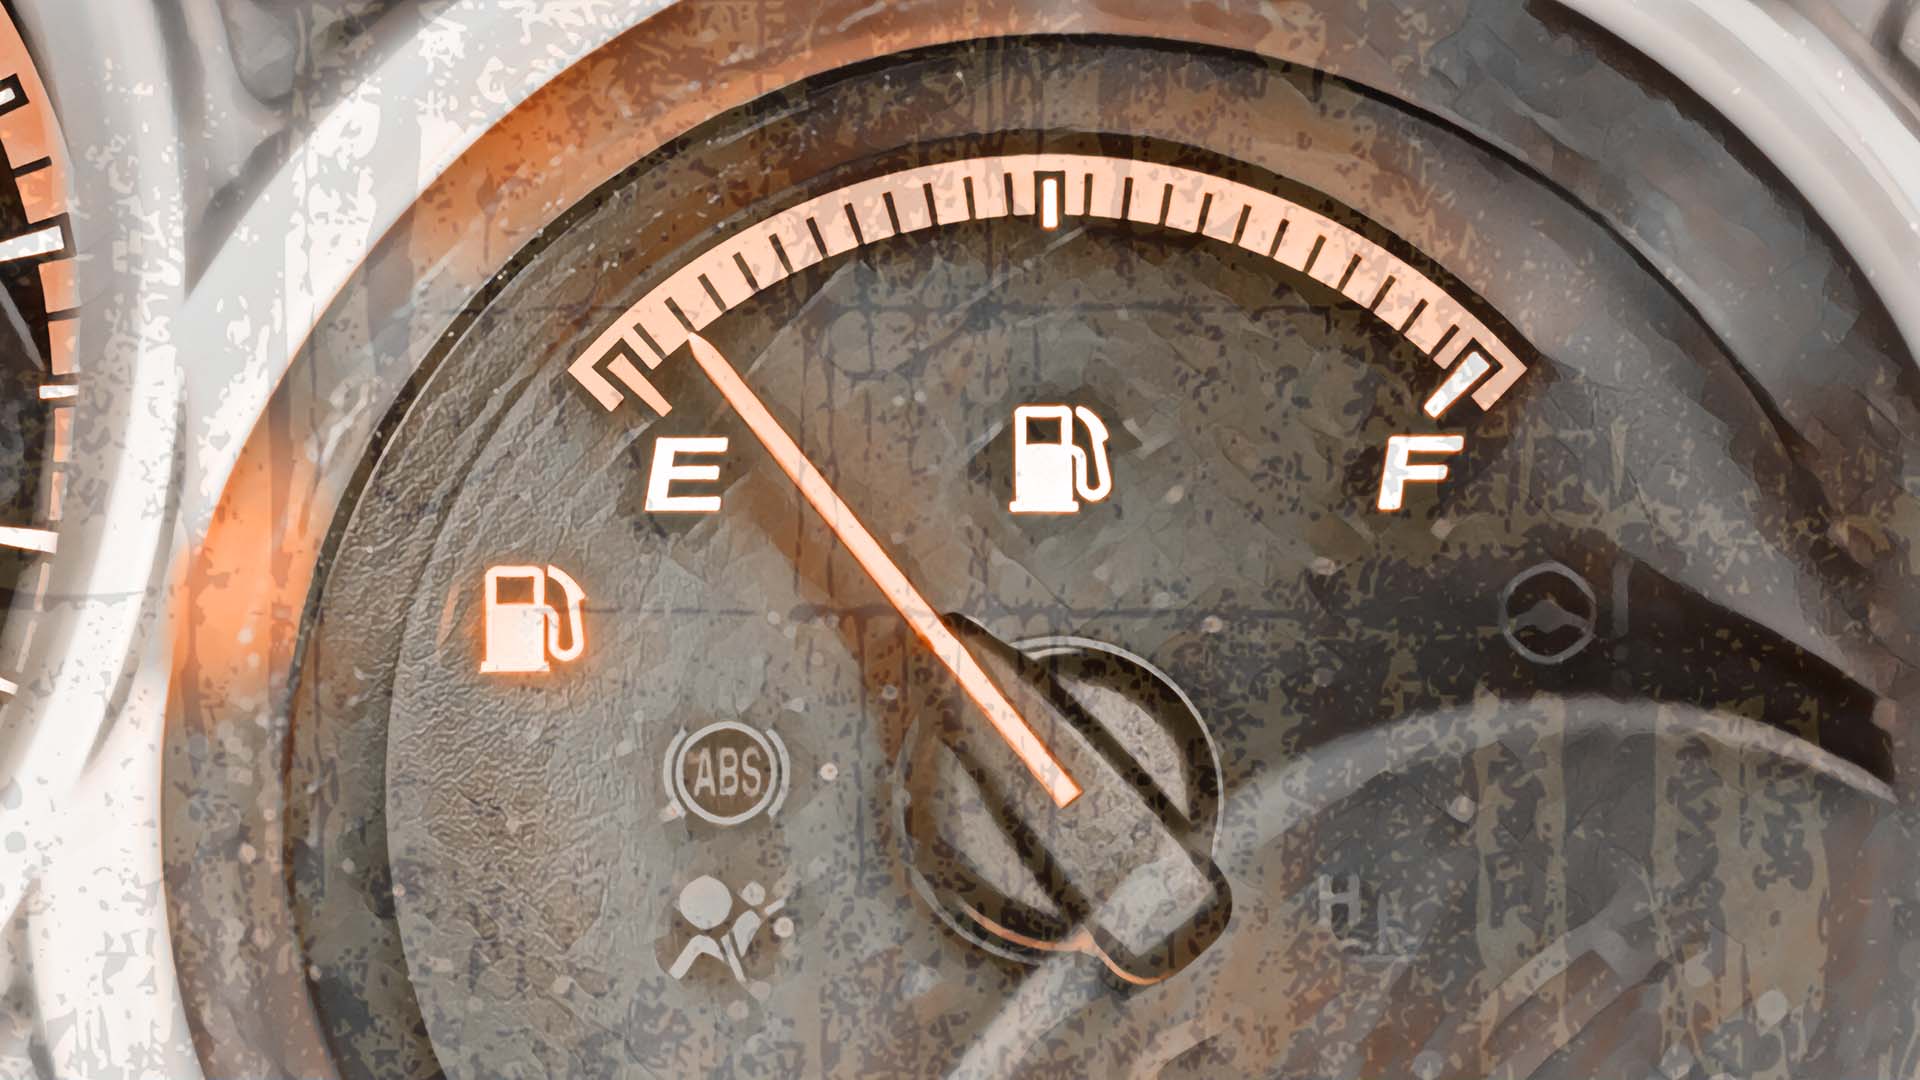 A fuel gauge is indicating a low level of fuel in a vehicle.